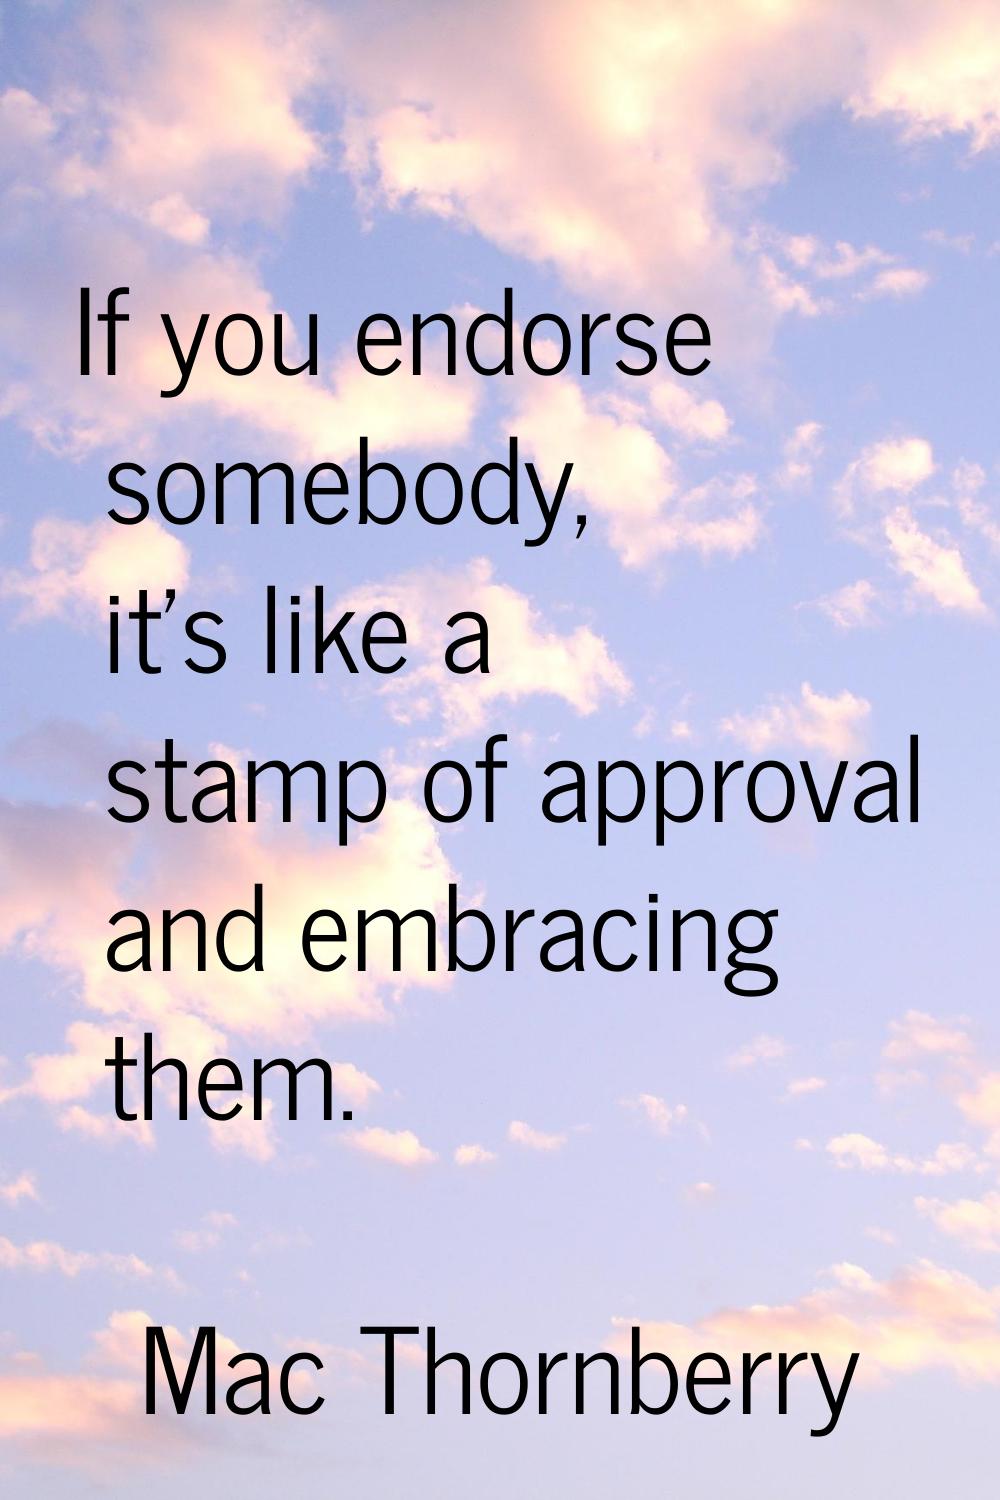 If you endorse somebody, it's like a stamp of approval and embracing them.